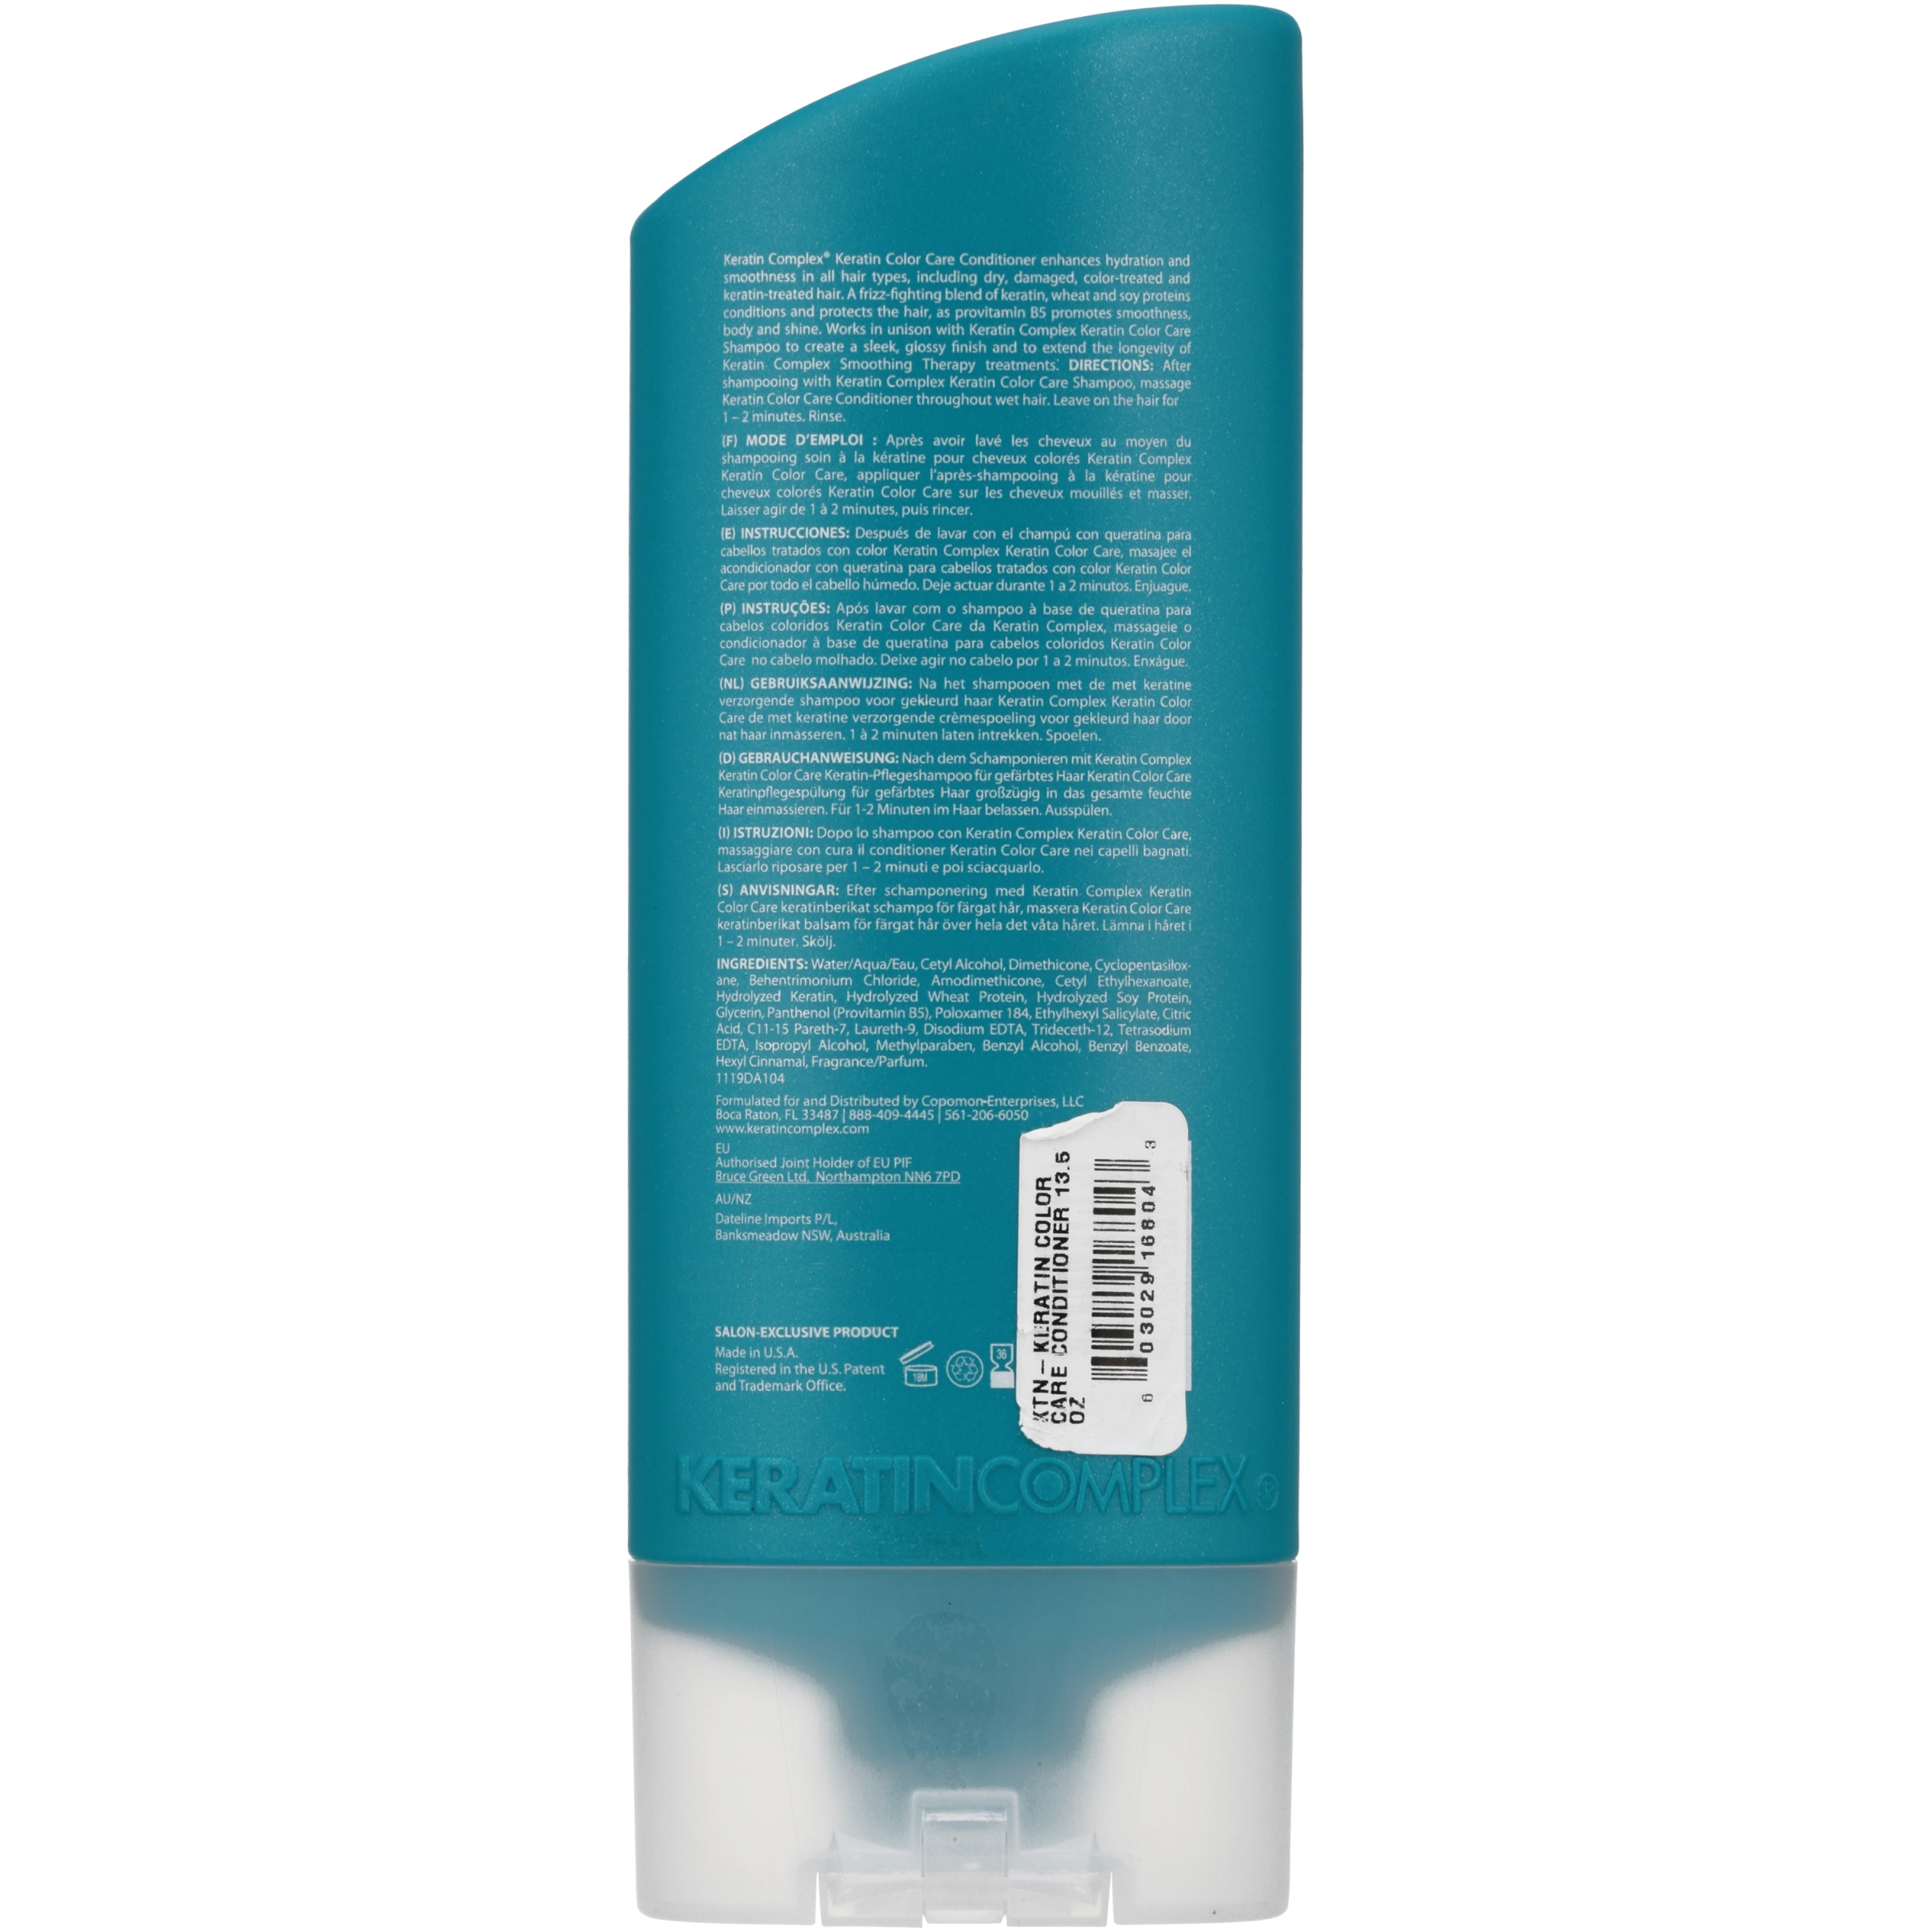 Keratin Complex Keratin Color Care Smoothing Therapy Conditioner - image 3 of 5